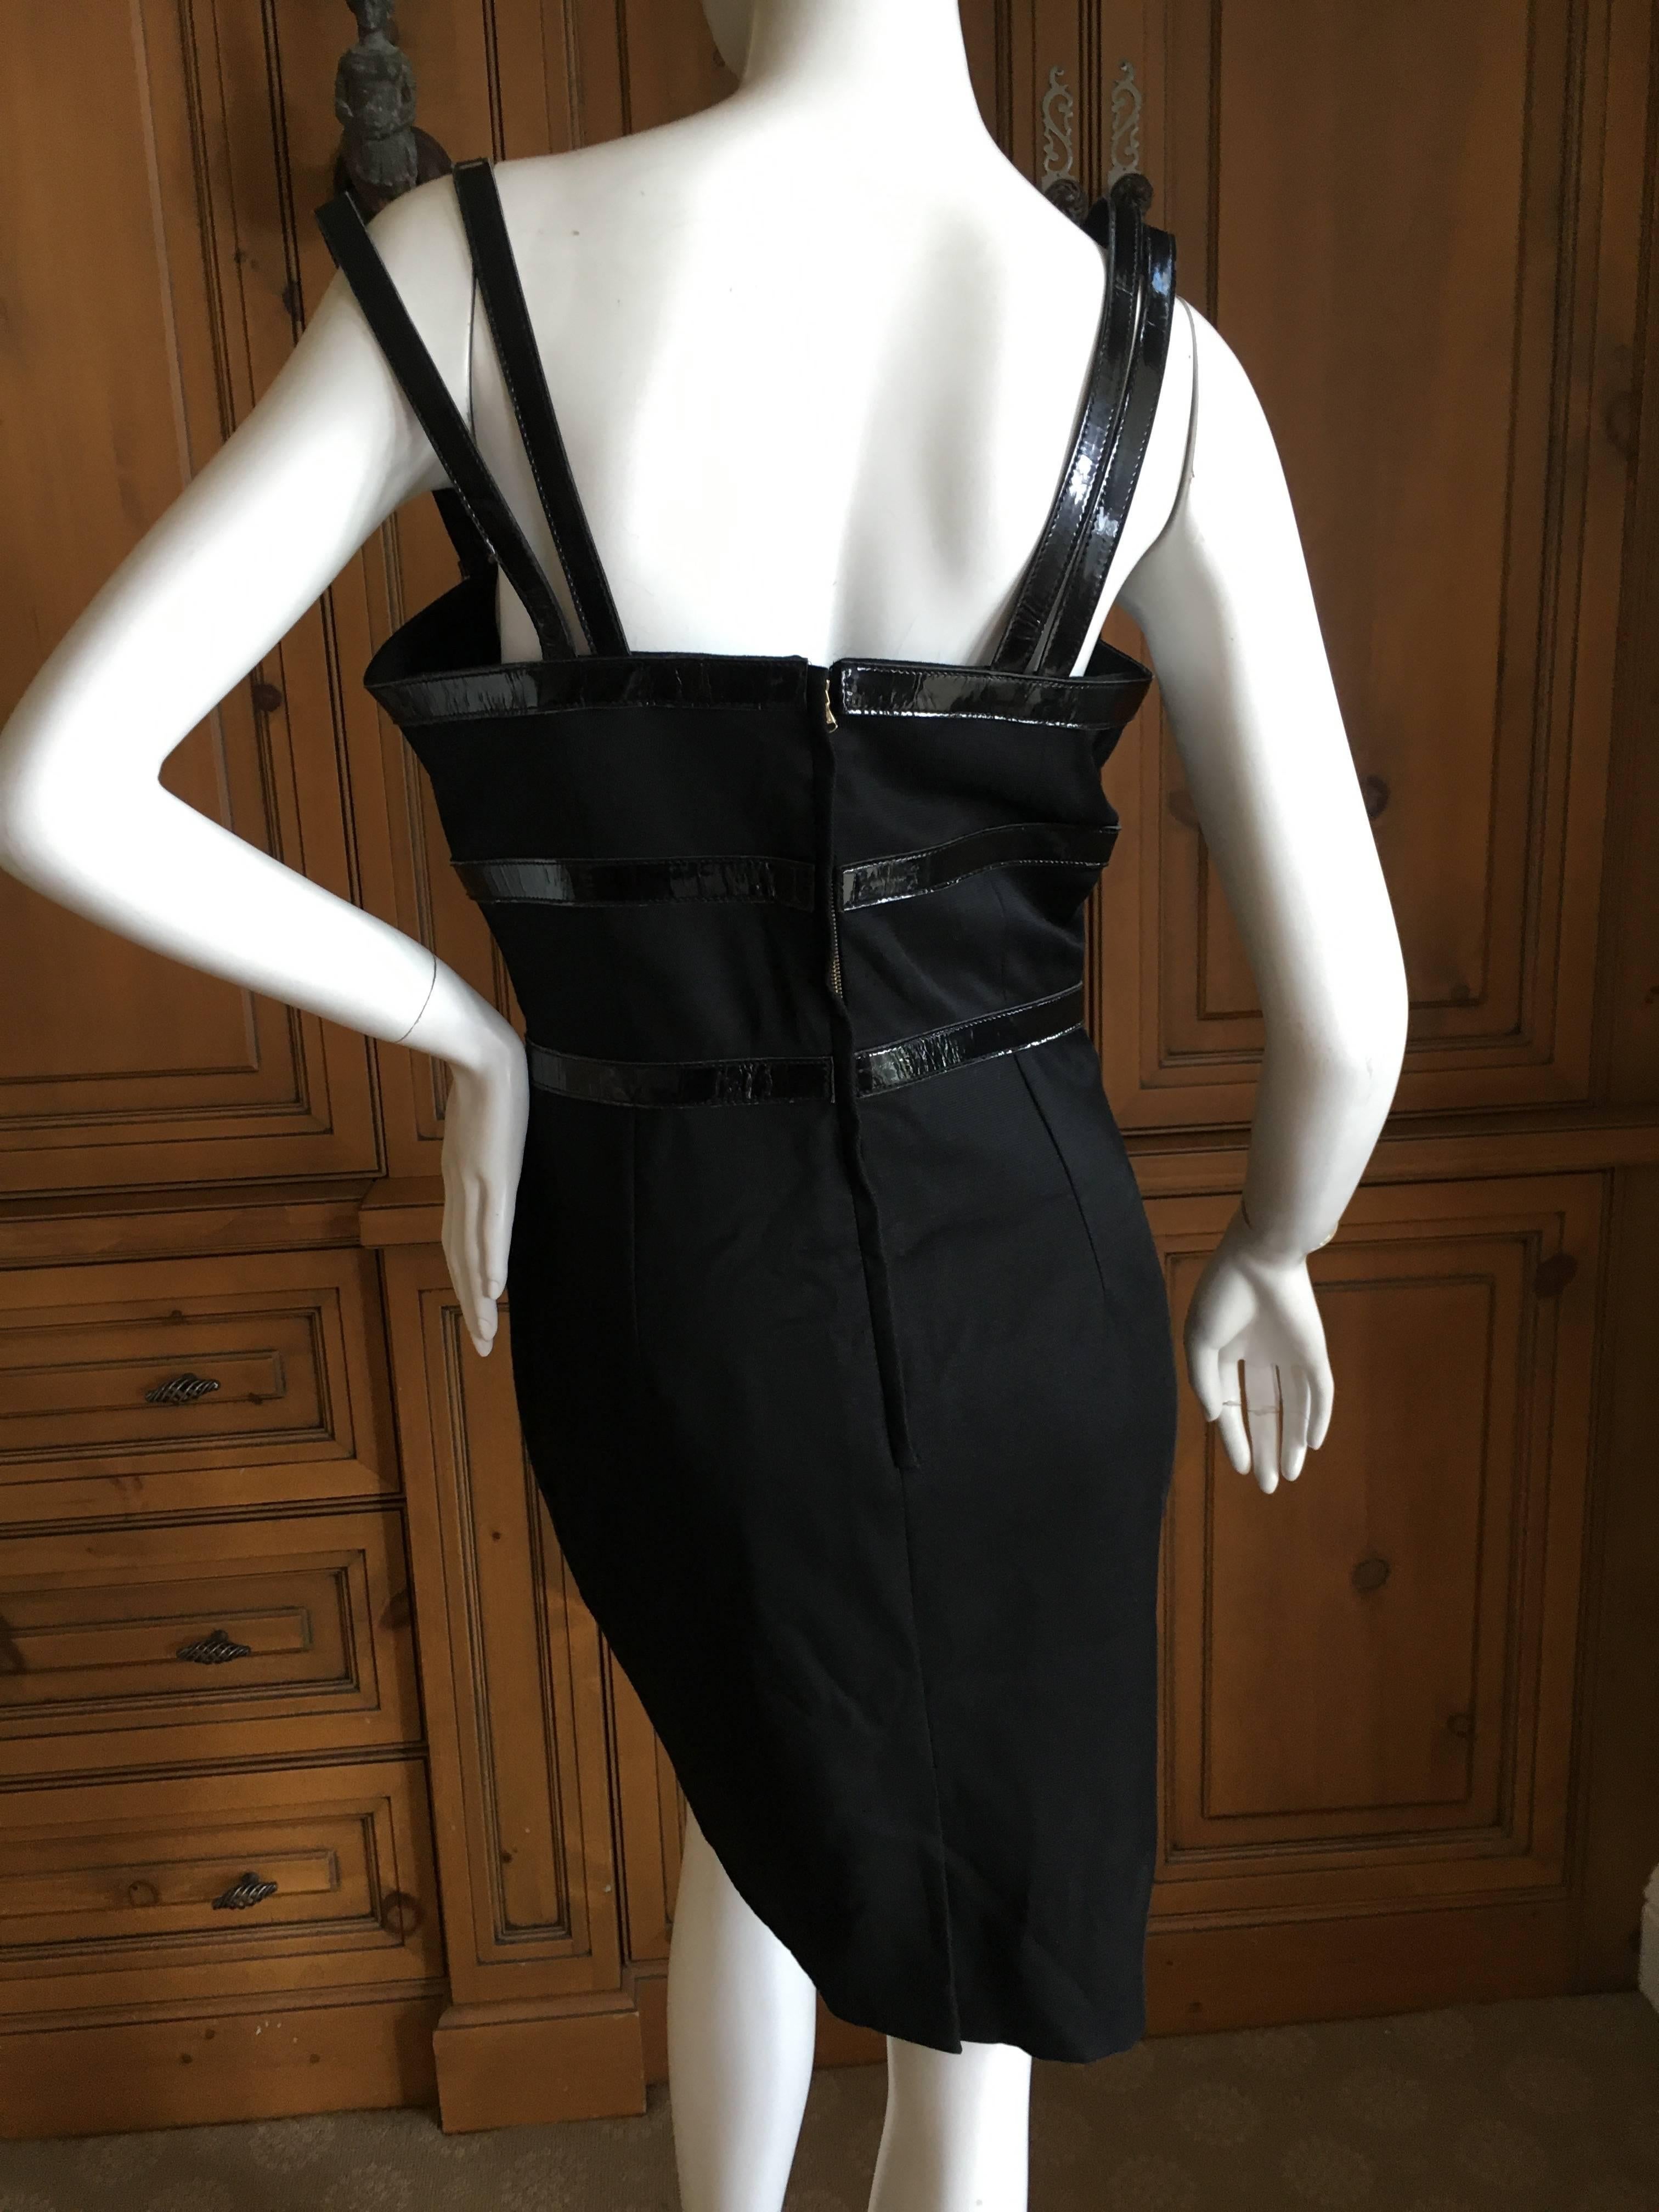 Dolce & Gabbana Vintage Patent Leather Trim Bondage Strap Little Black Dress.
This is so sexy, lined in leopard print 
Size 44
Bust 38"
Waist 28"
Hips 41"
Length 36"
Excellent condition , there is some cracking of the patent